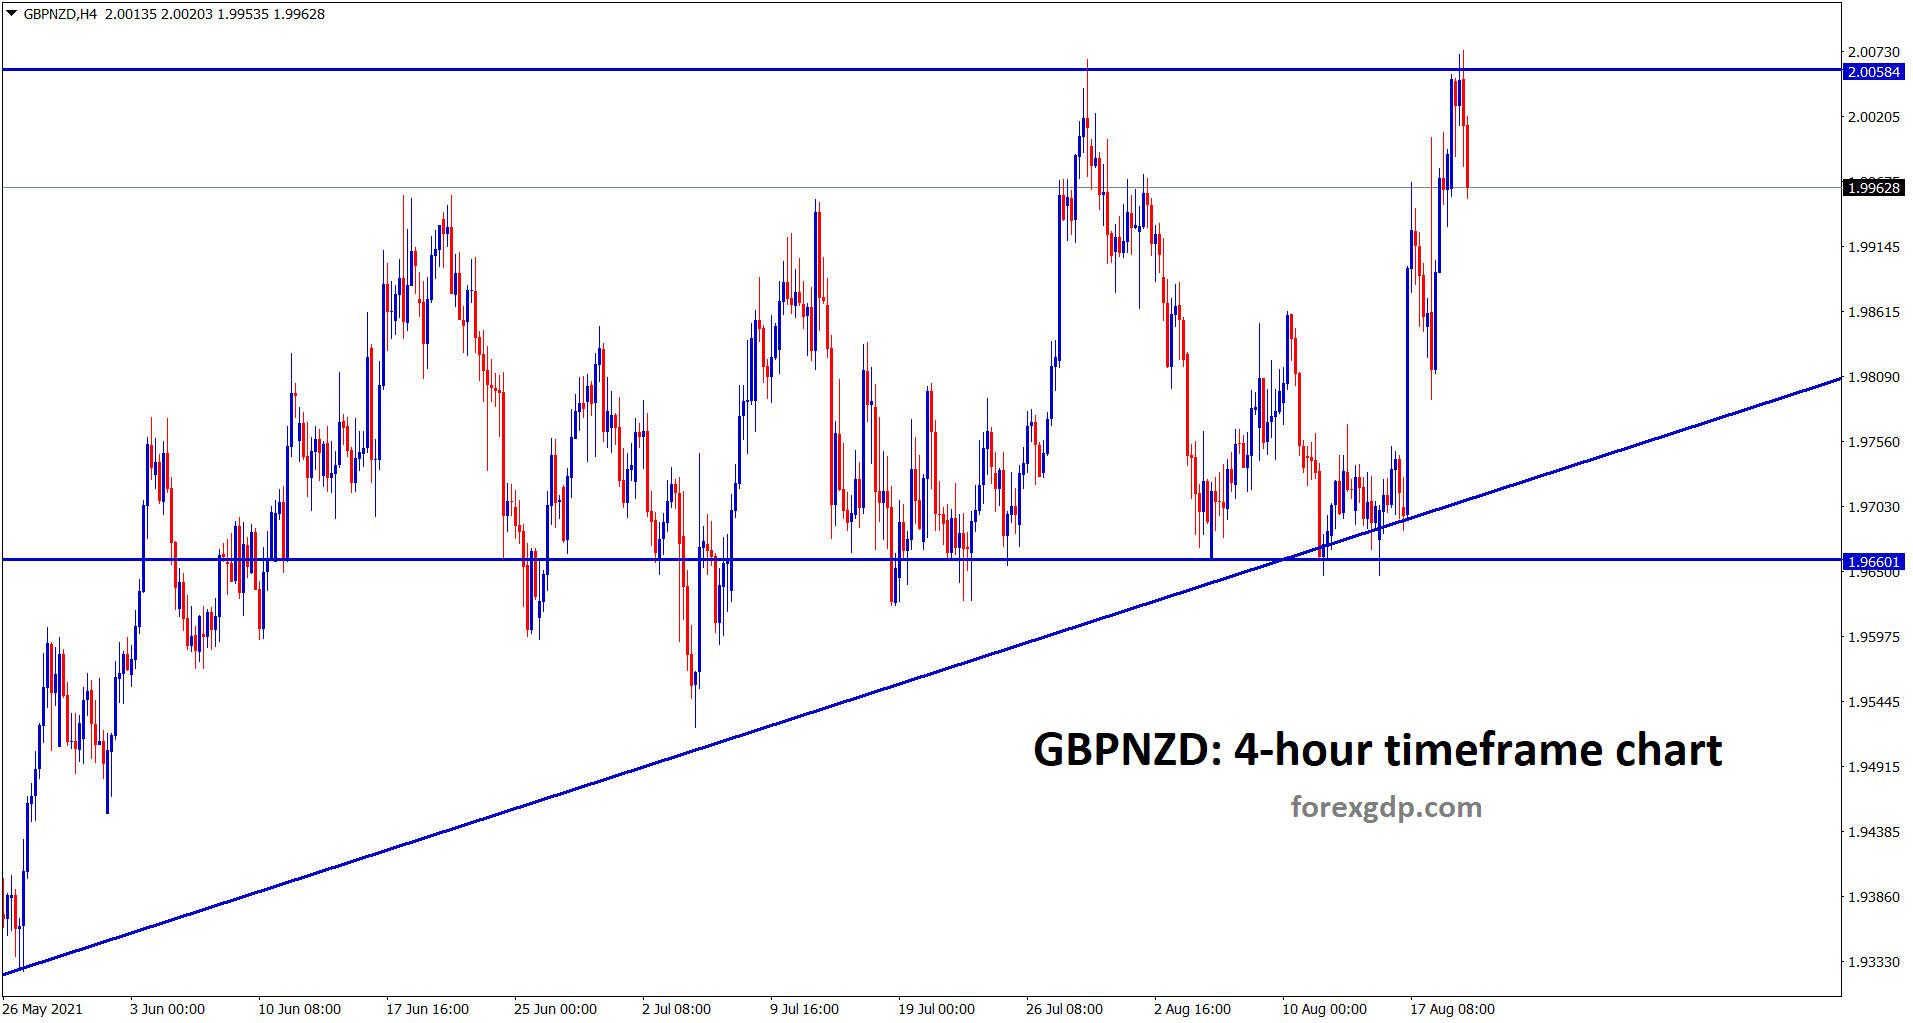 GBPNZD hits the resistance and making some correction now